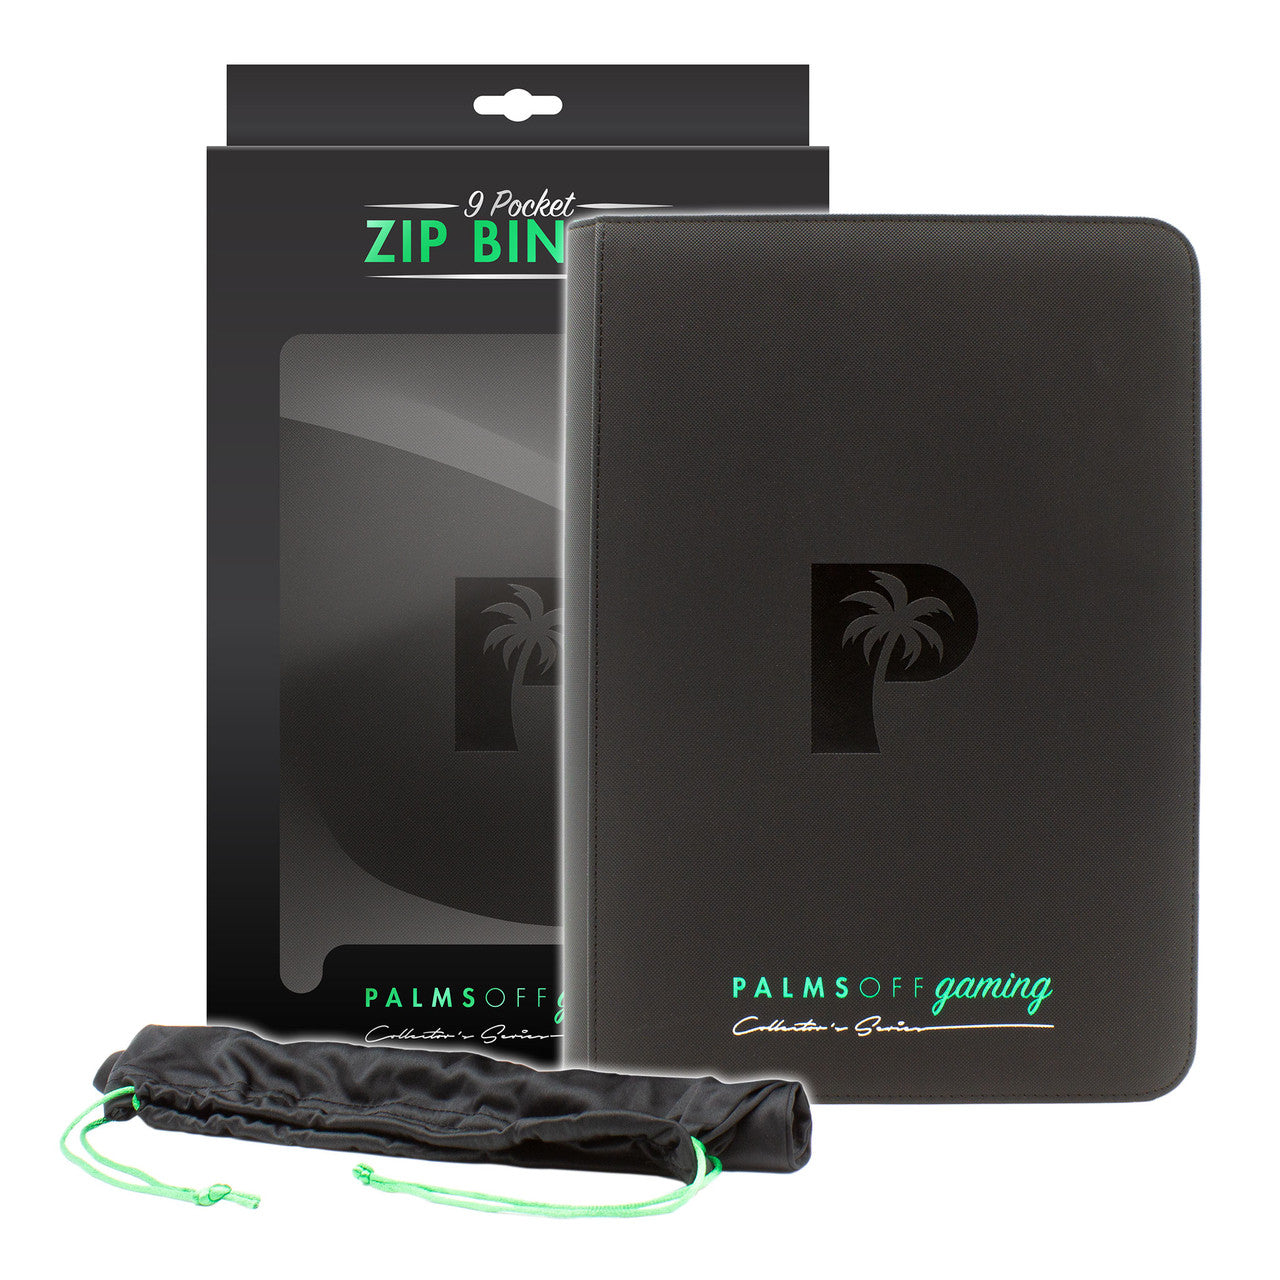 Palms Off Gaming - Collector's Series 9 Pocket Zip Trading Card Binder